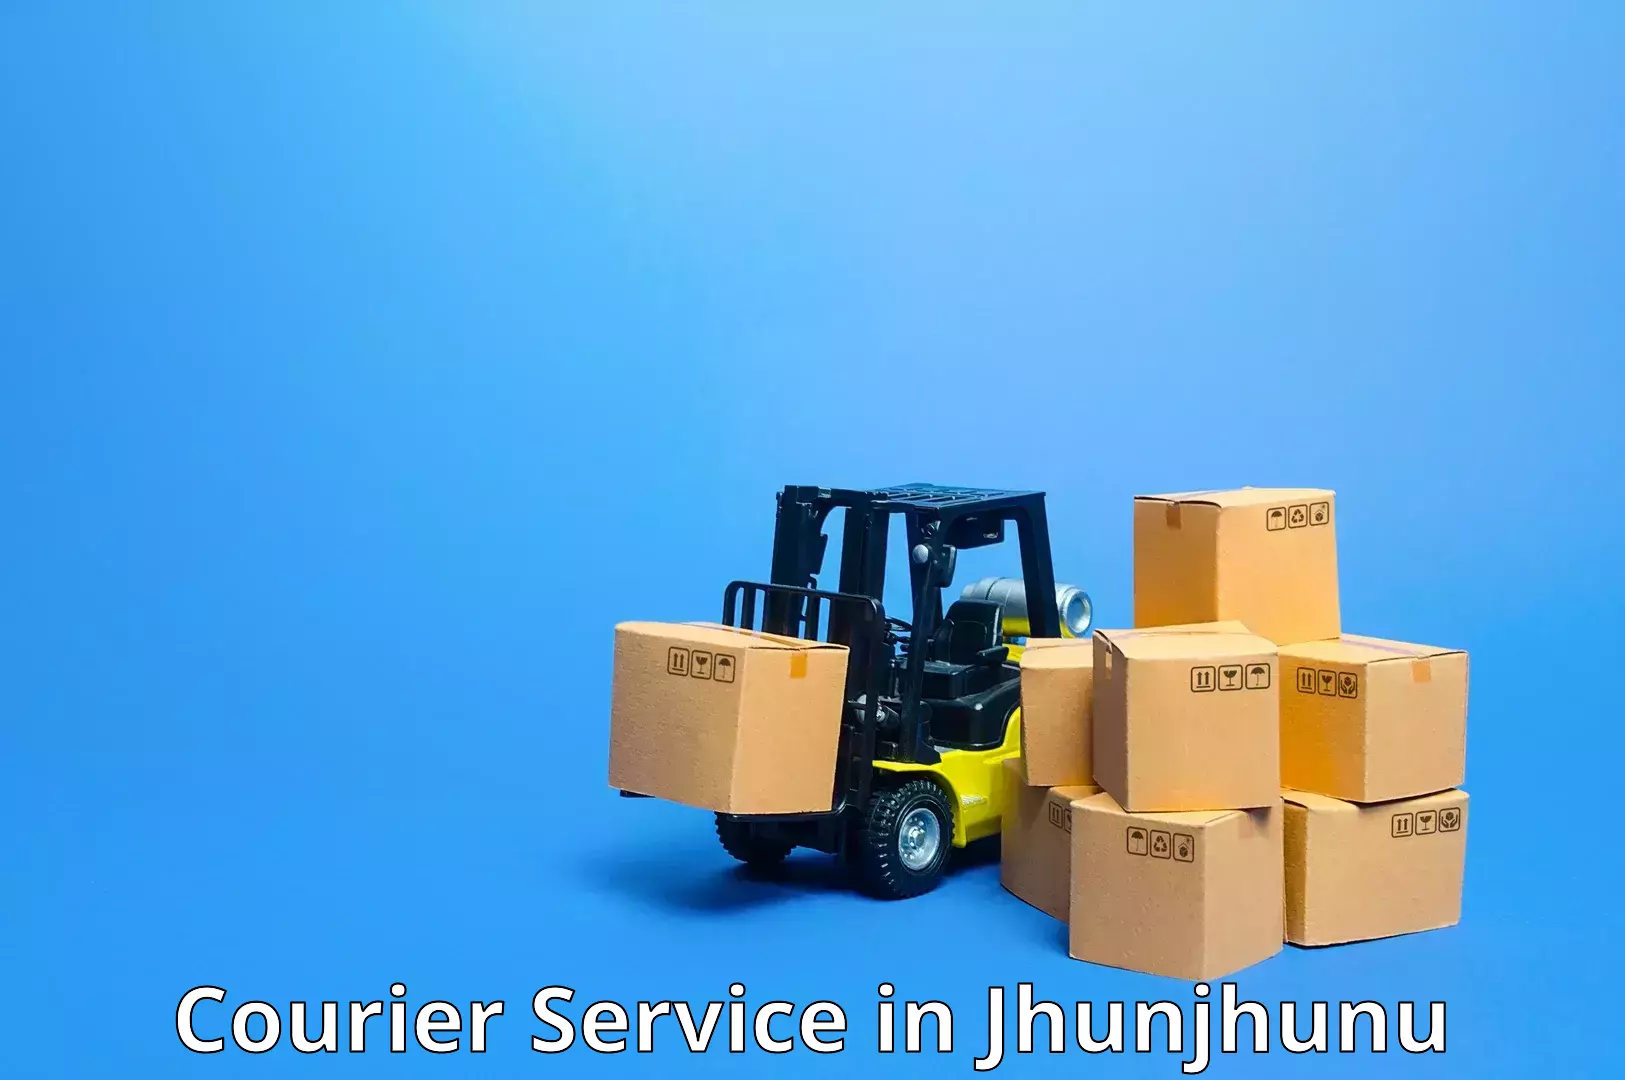 Scheduled delivery in Jhunjhunu